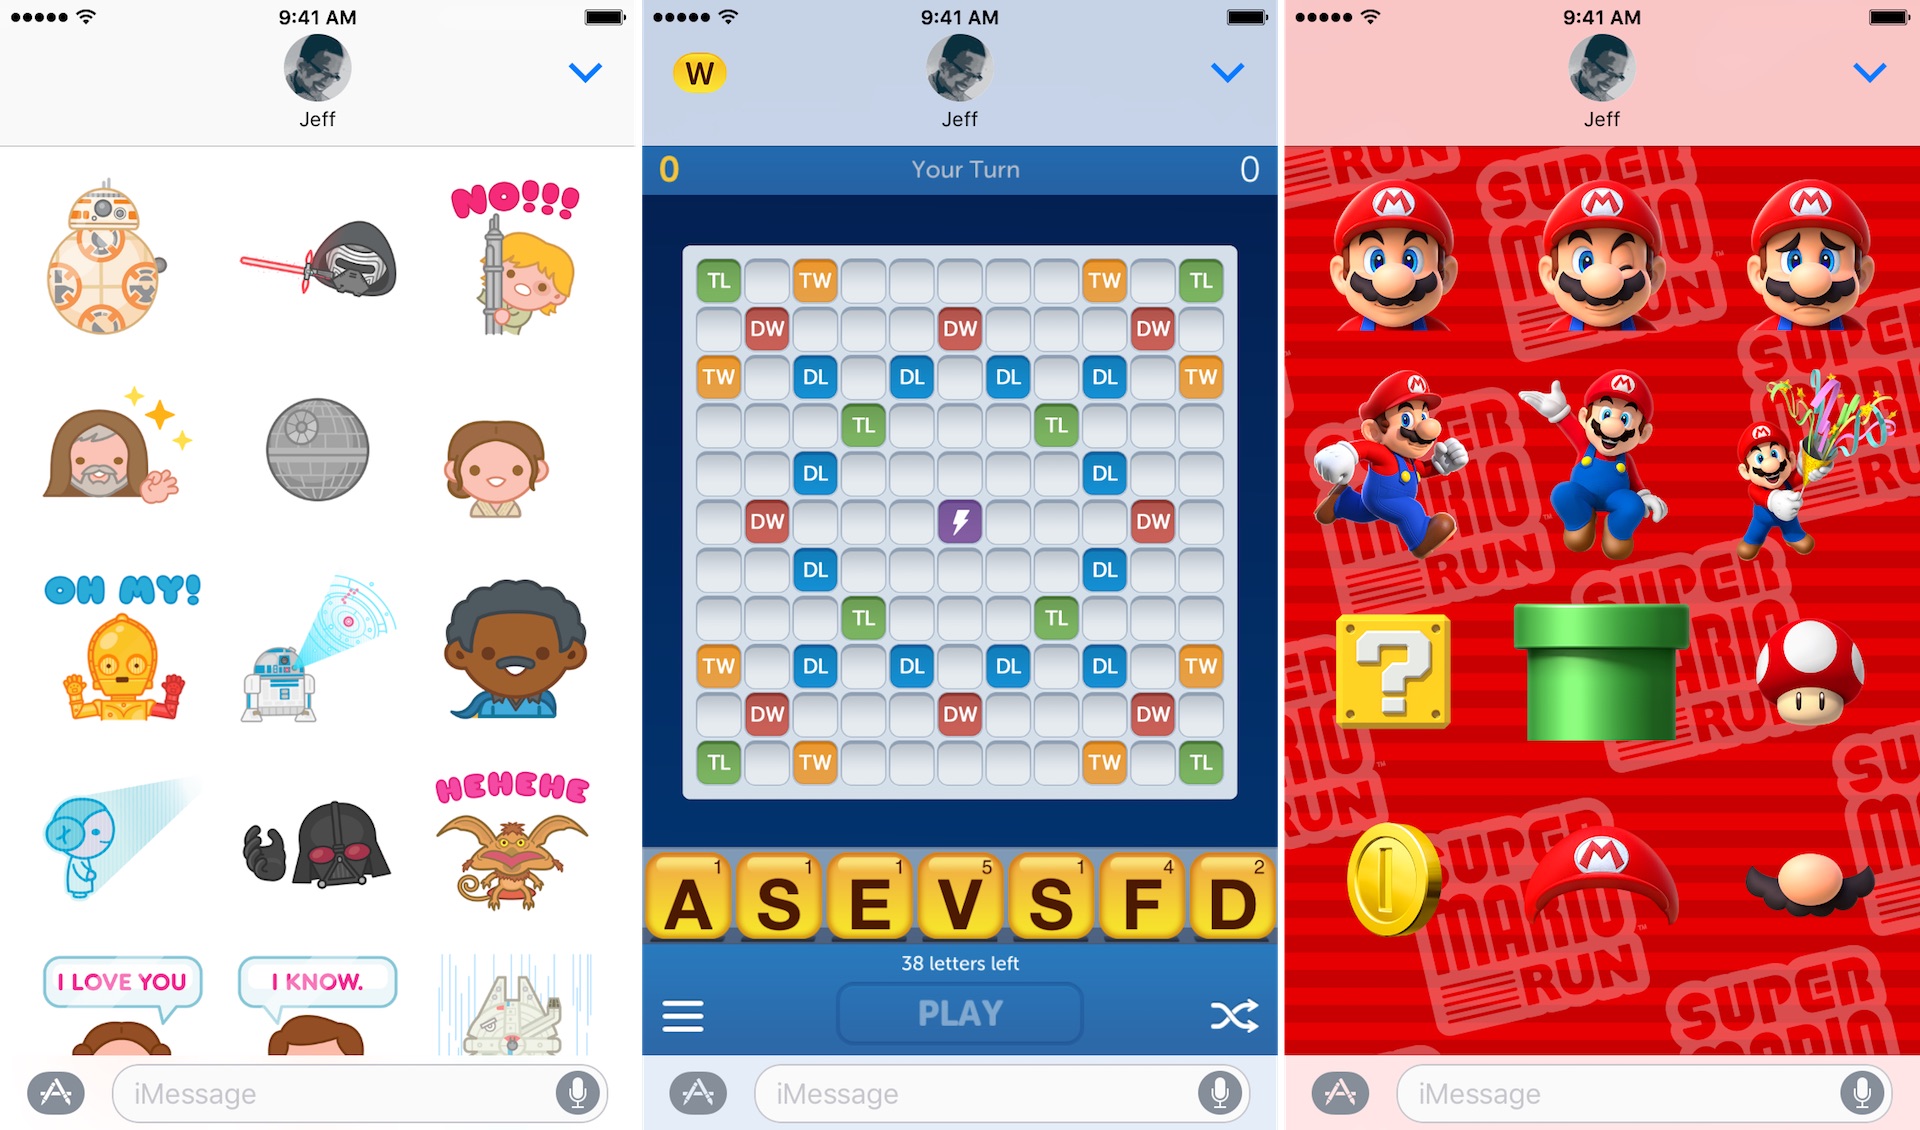 imessage-apps-and-stickers